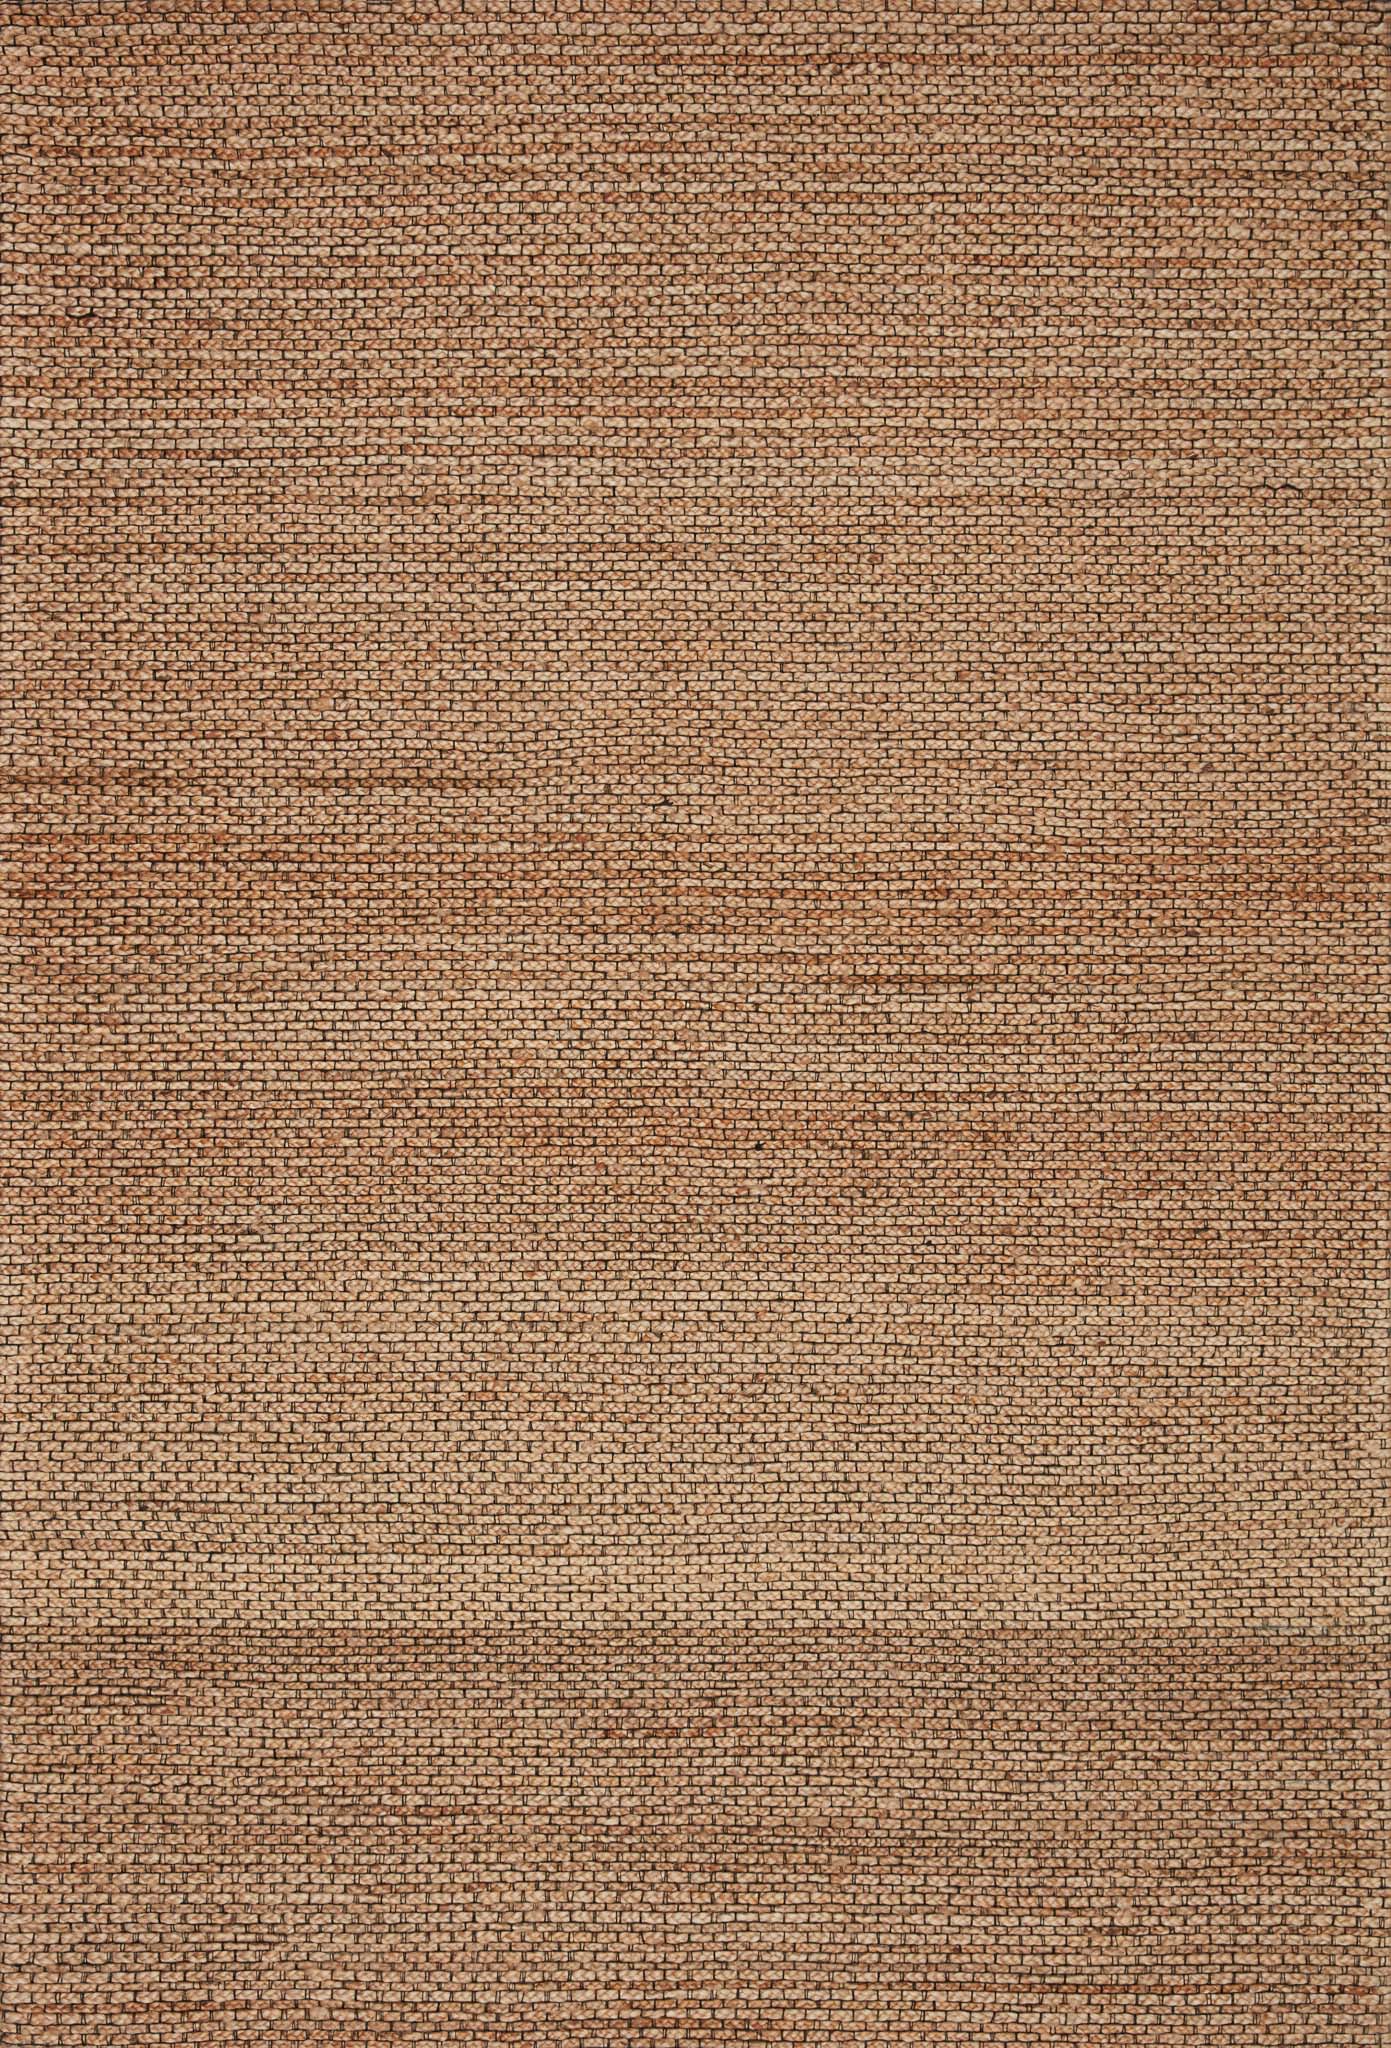 Loloi Lily LIL-01 Natural Area Rug